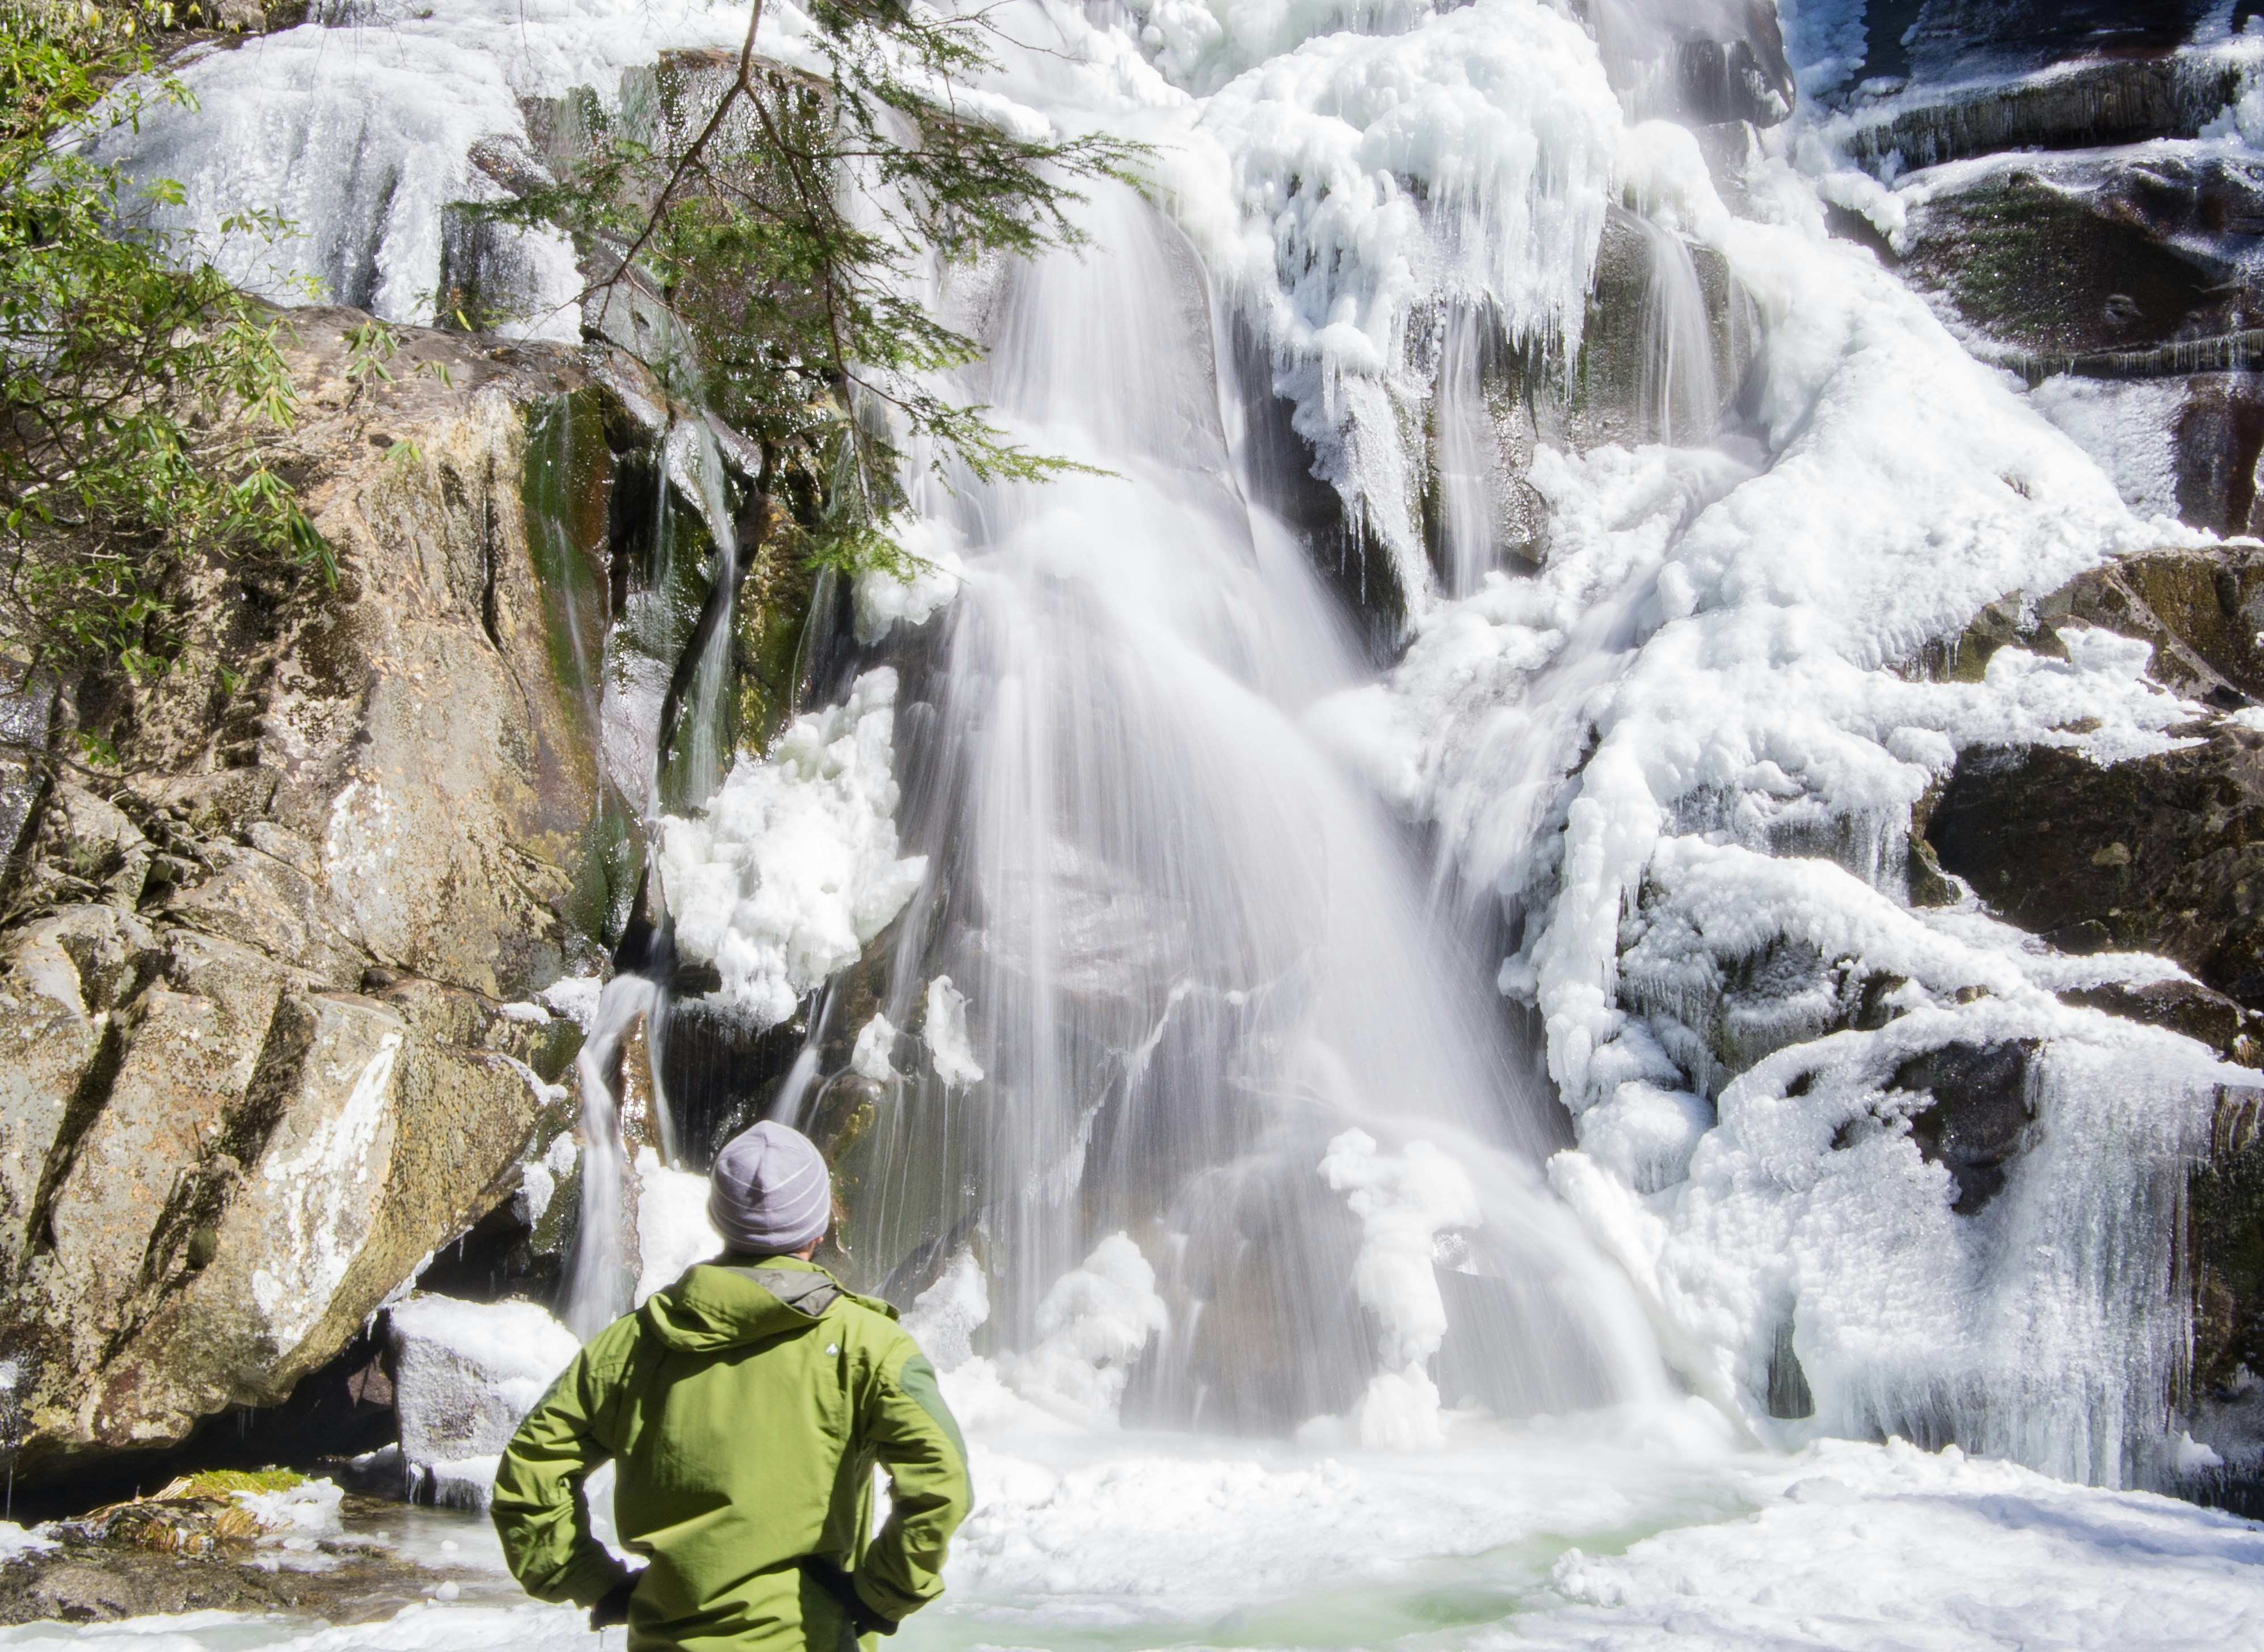 Man stands in front of waterfall in The Great Smoky Mountains National Park